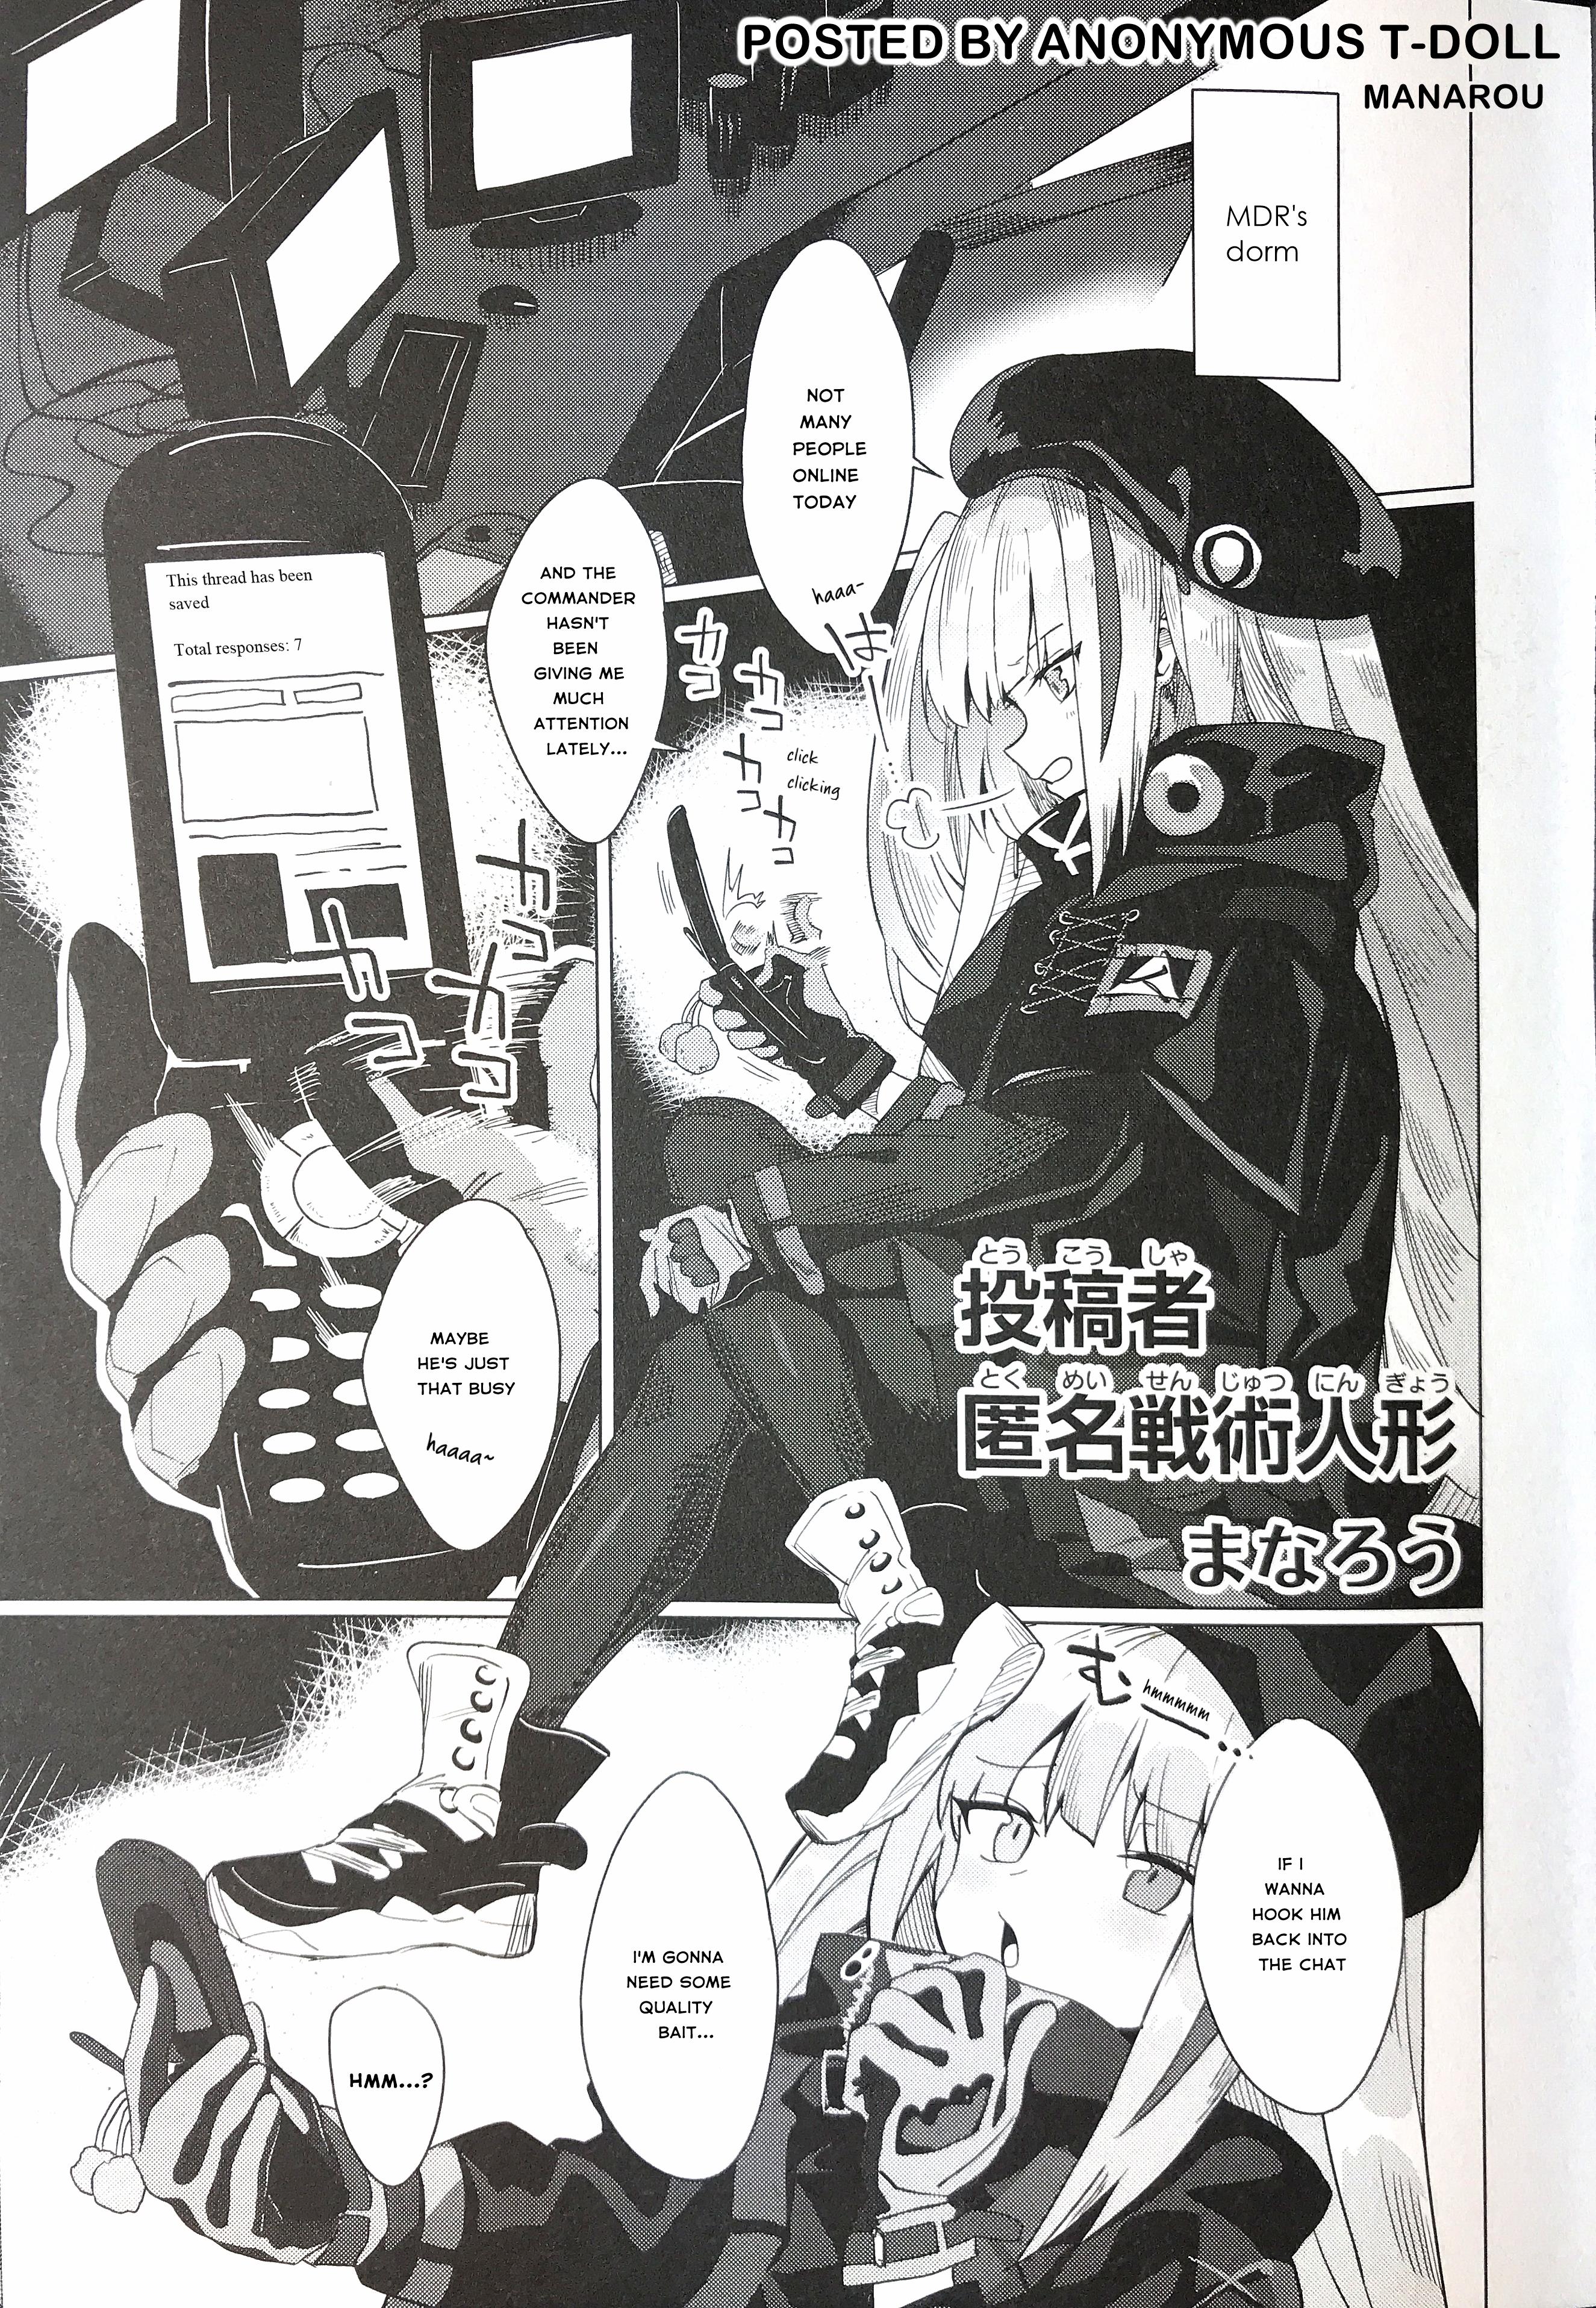 Dolls Frontline Comic Anthology - DNA Media 2019 - Chapter 32891 - Posted by Anonymous T-Doll - Image 1